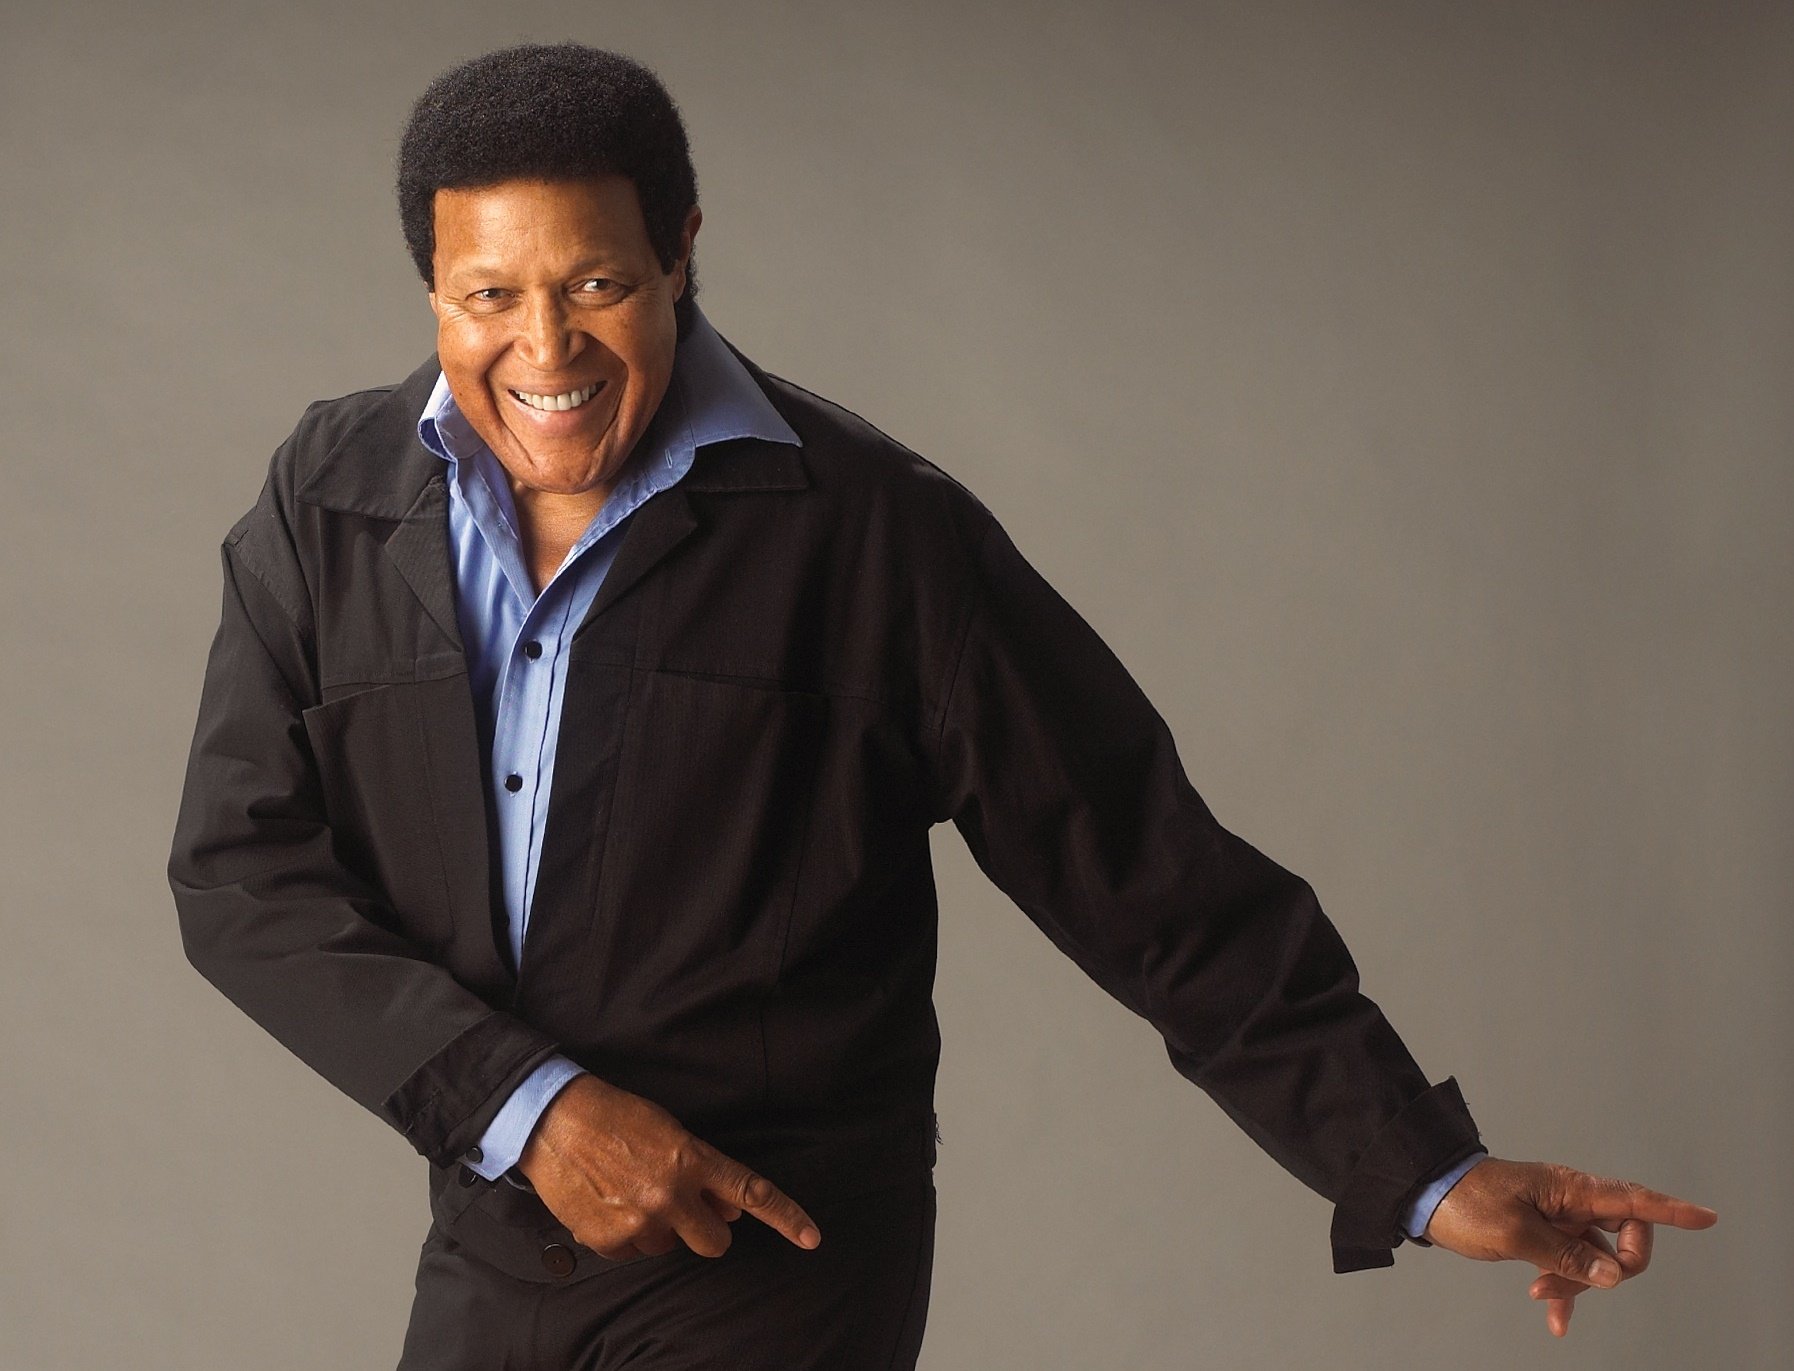 A Big BOSS Happy Birthday today to Chubby Checker from all of us at The Boss!  